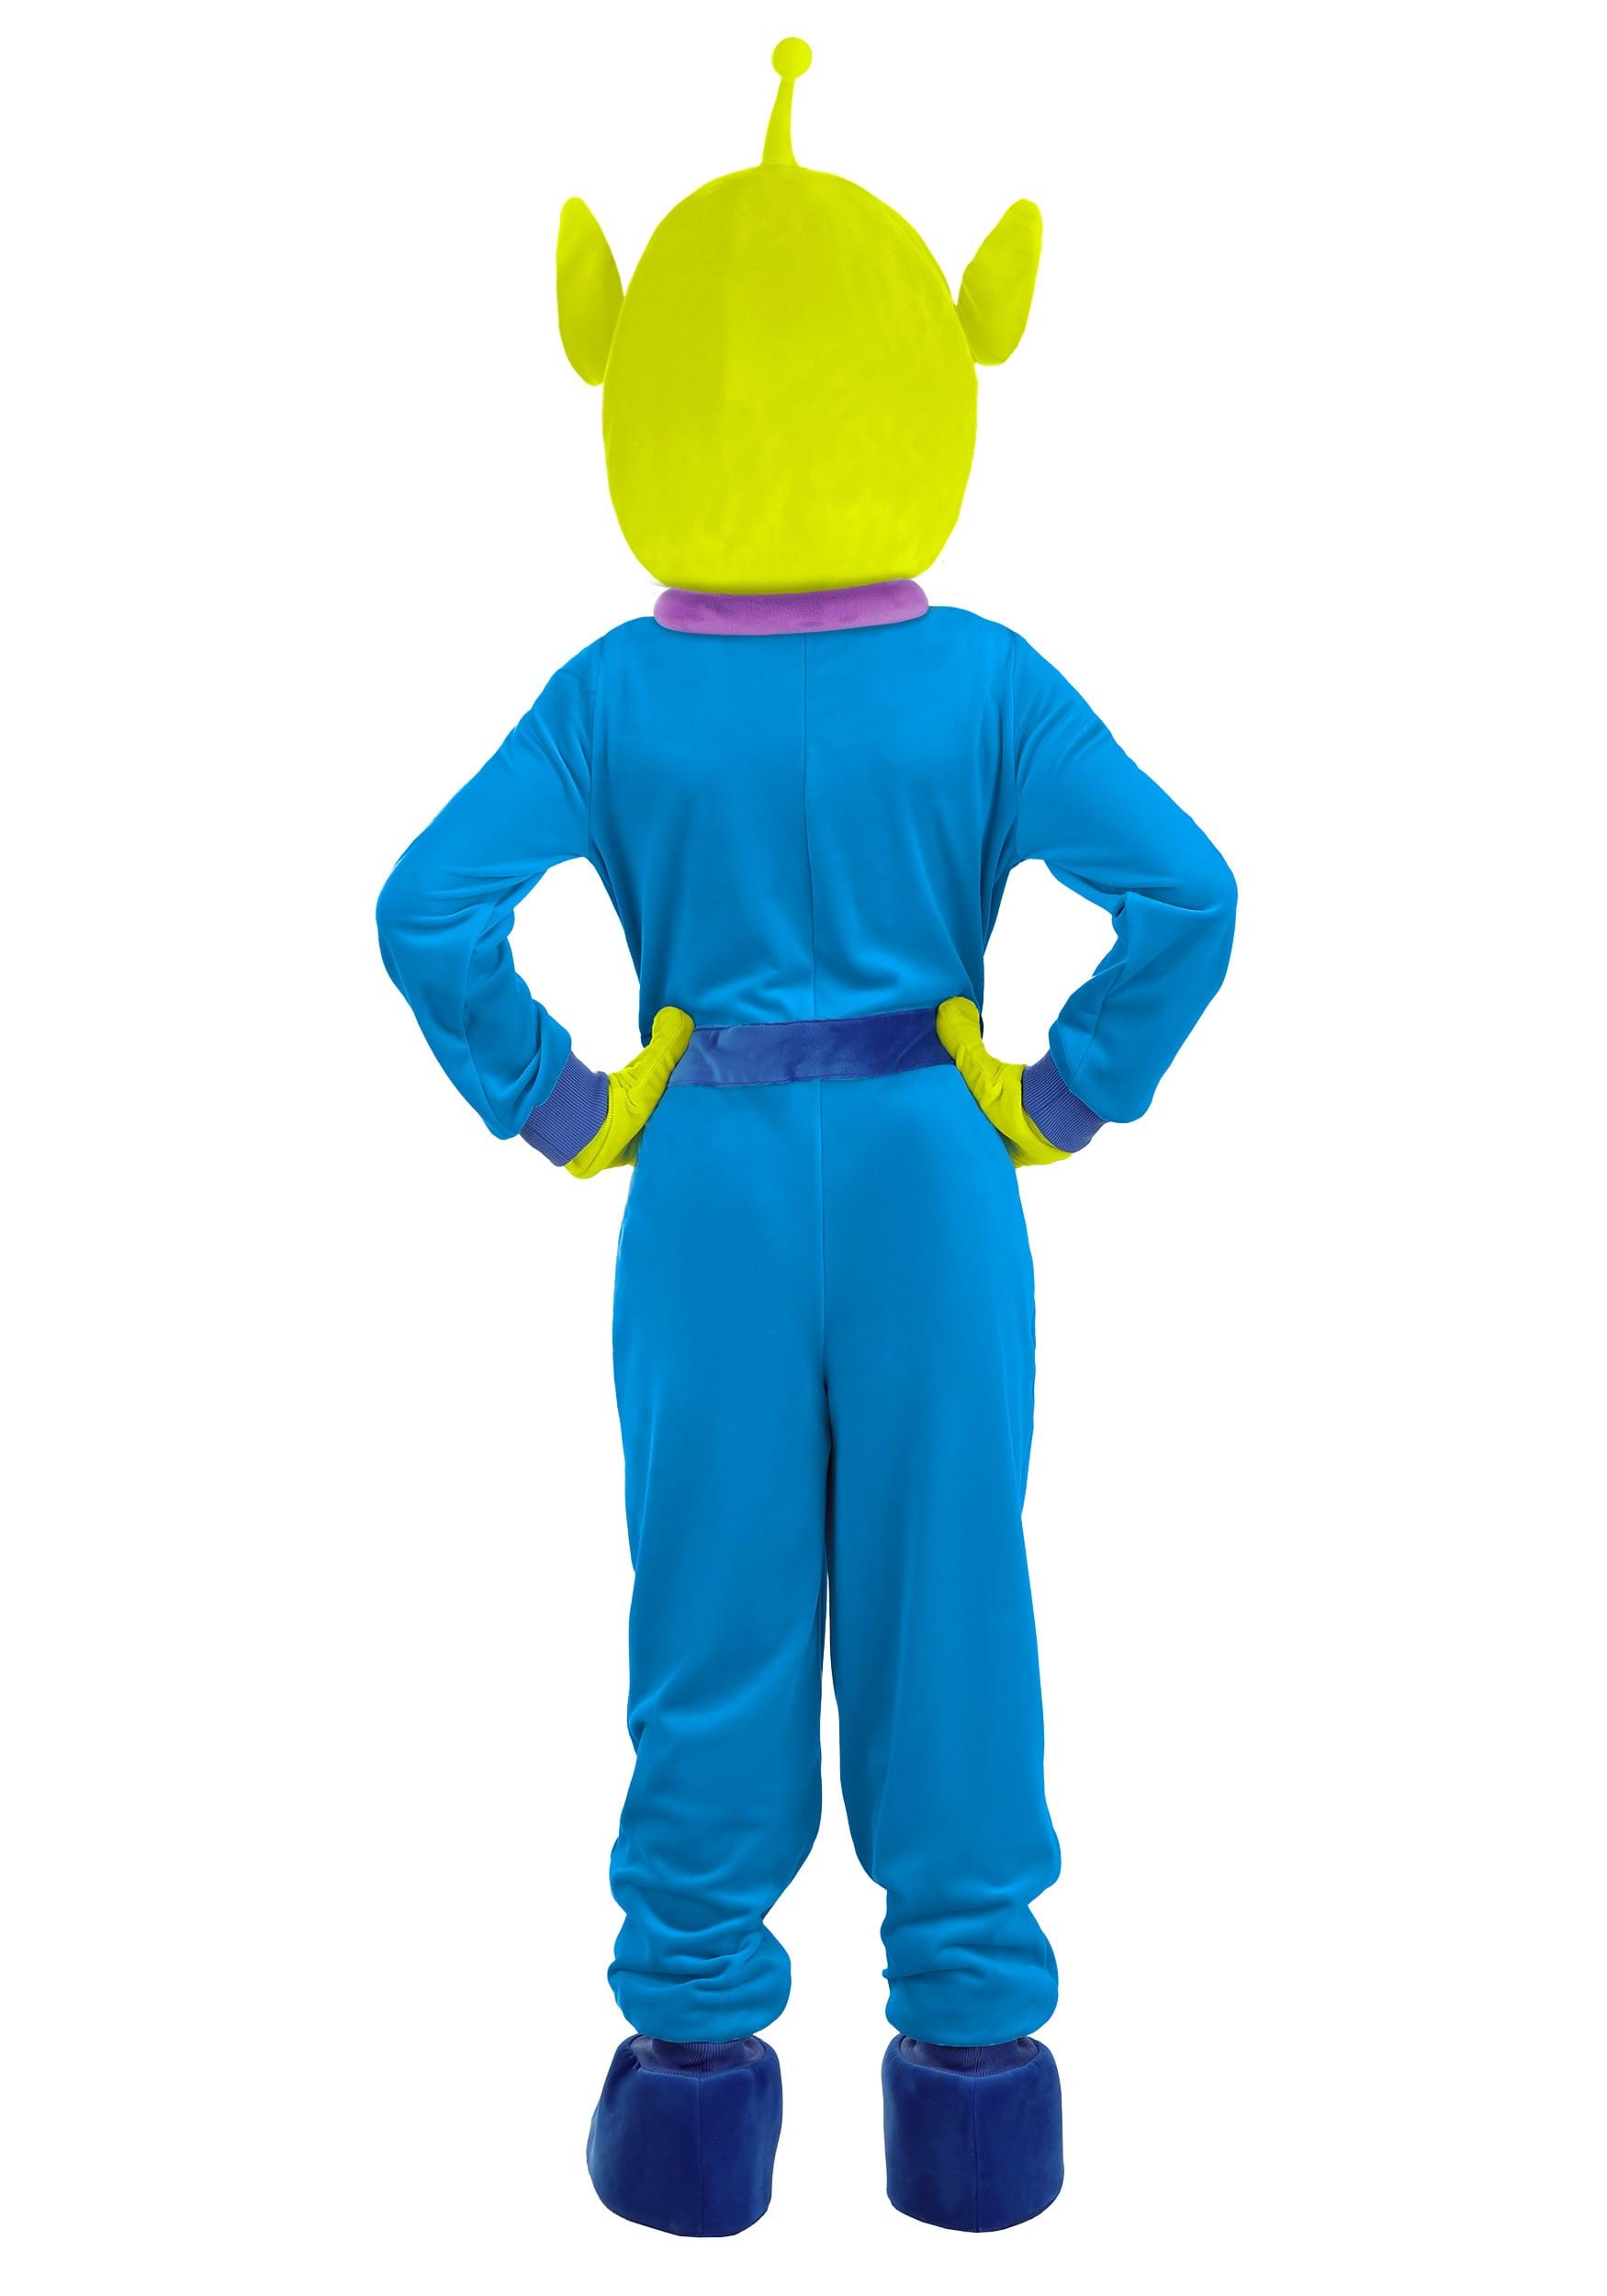 Disney And Pixar Toy Story Alien Costume For Kids